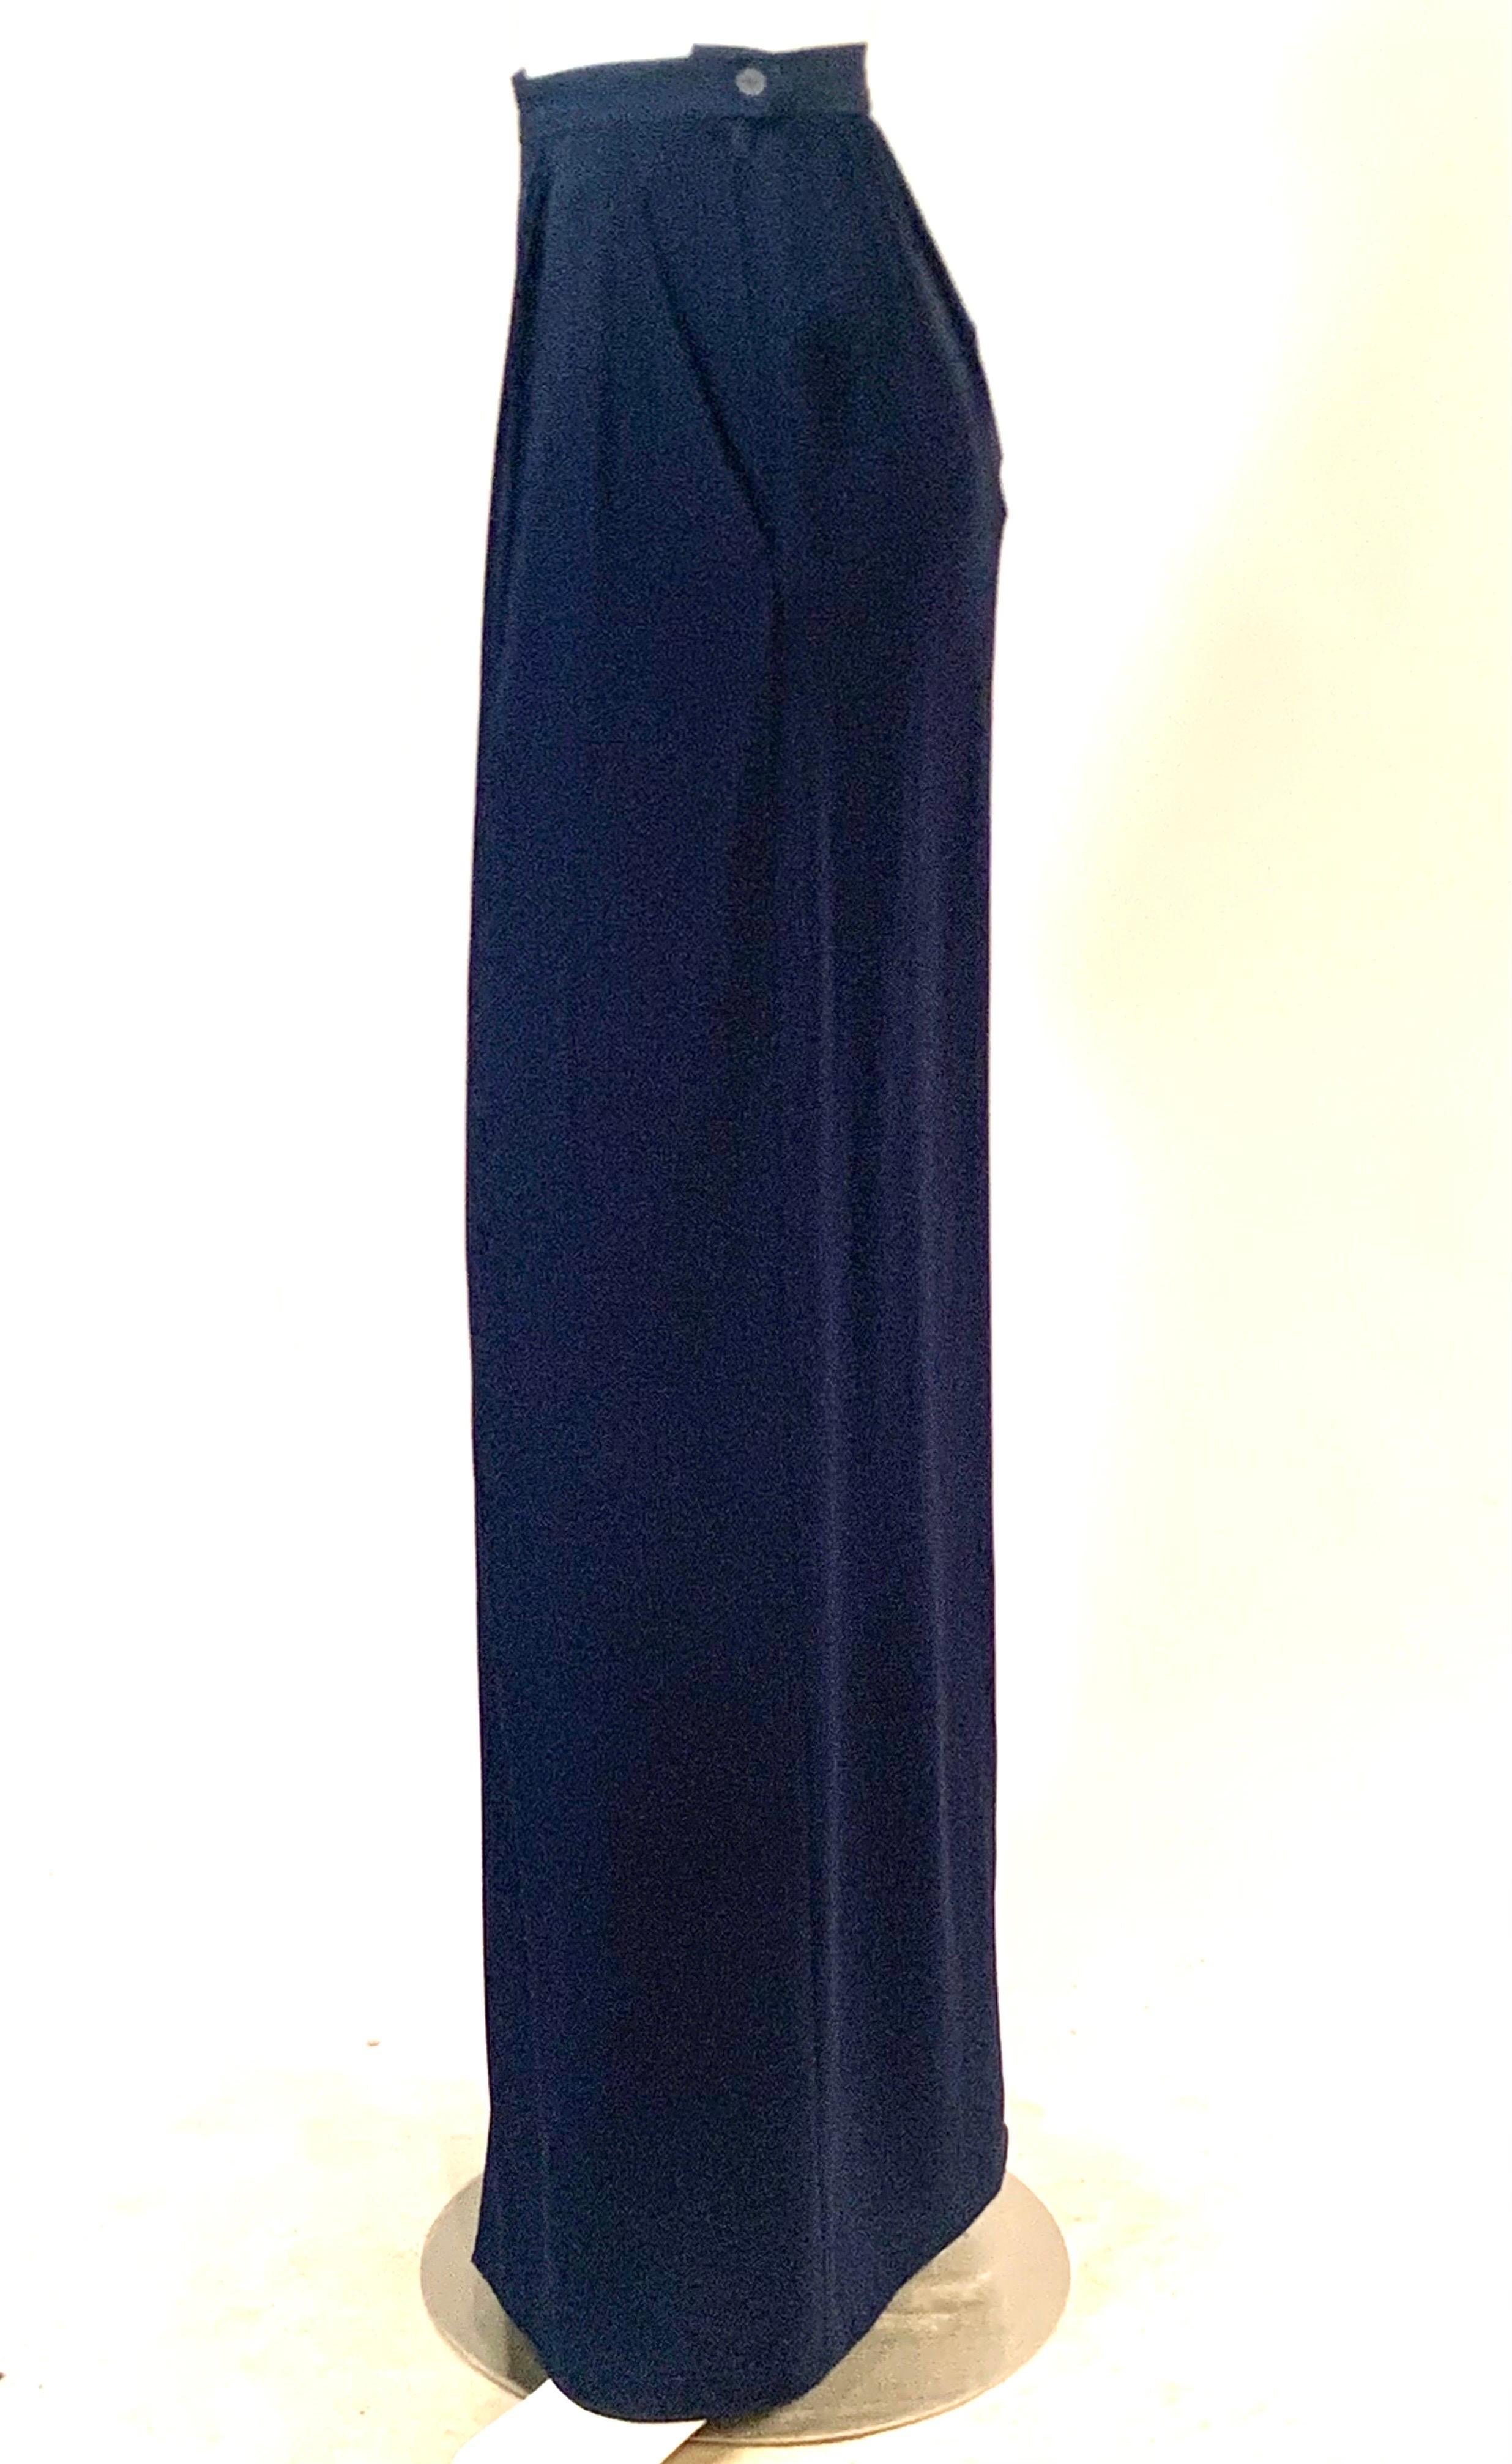 Women's Yves Saint Laurent Navy Blue Long Skirt with Original Tags Never Worn For Sale